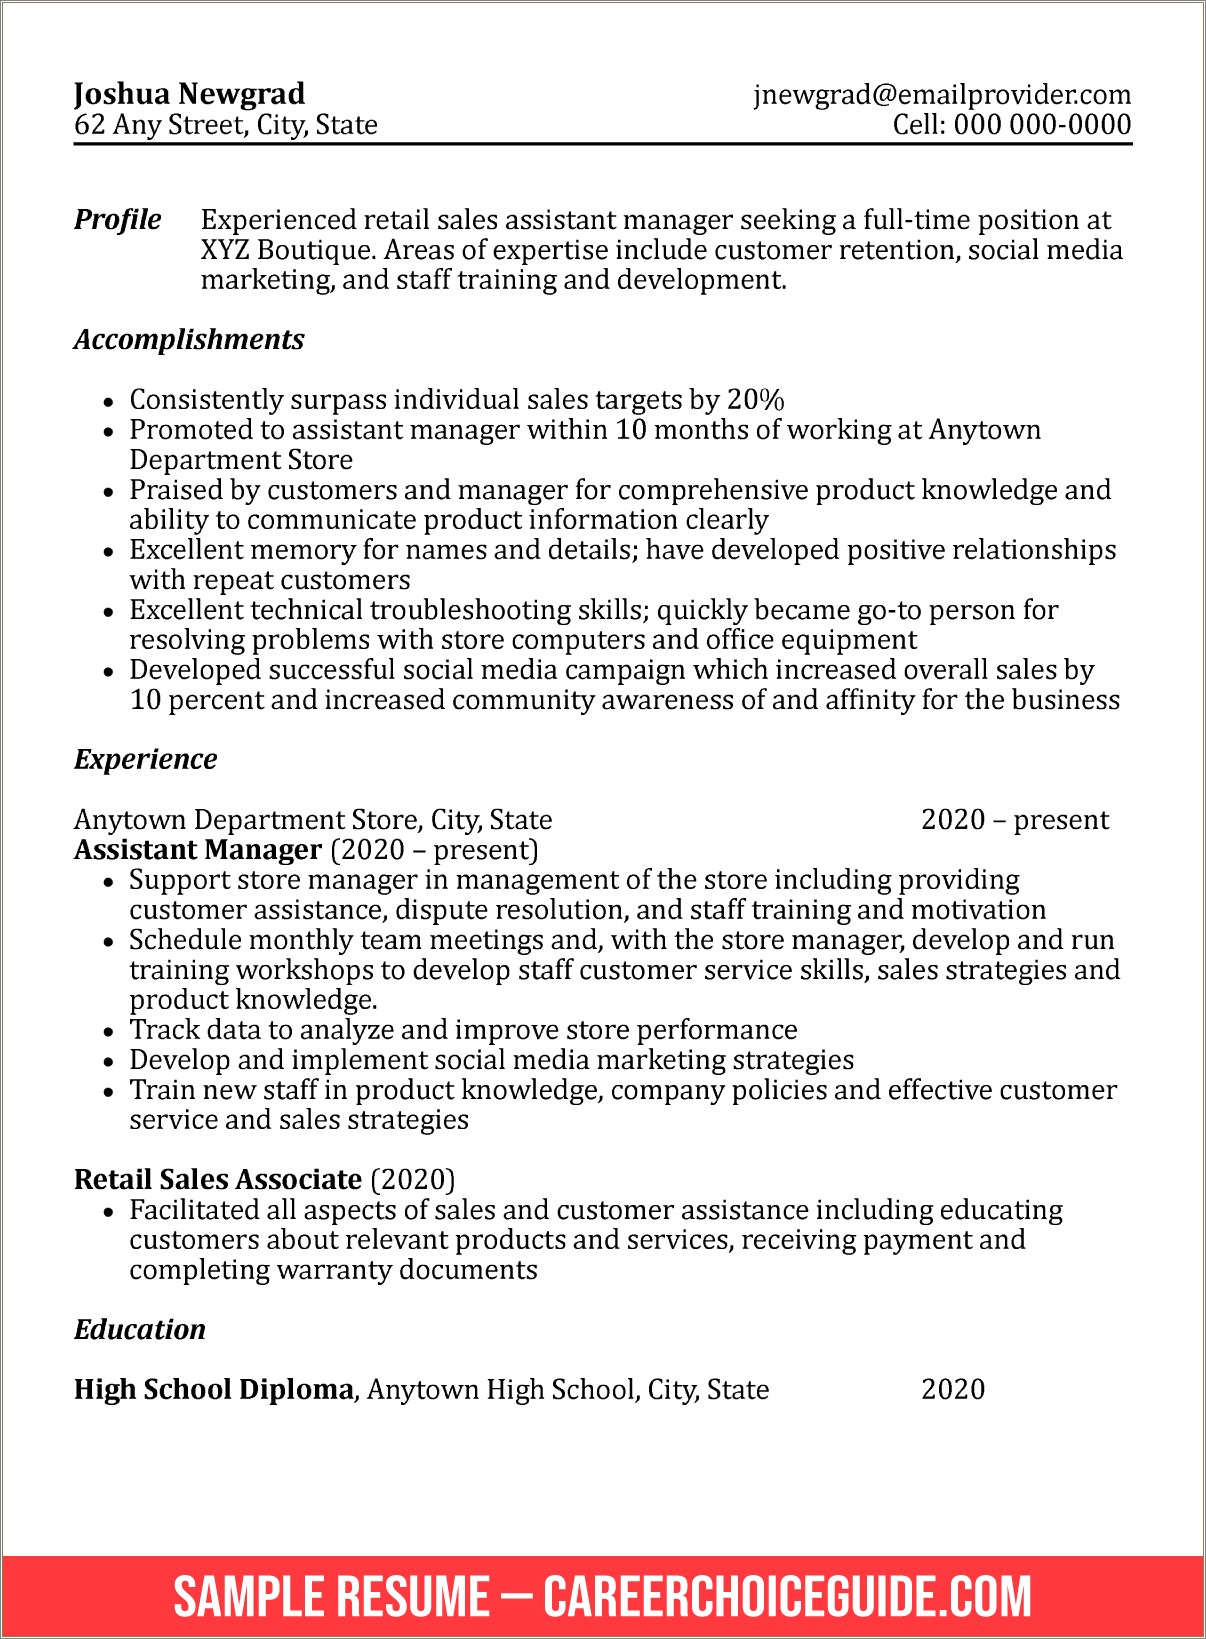 Example High School Resumes For Students